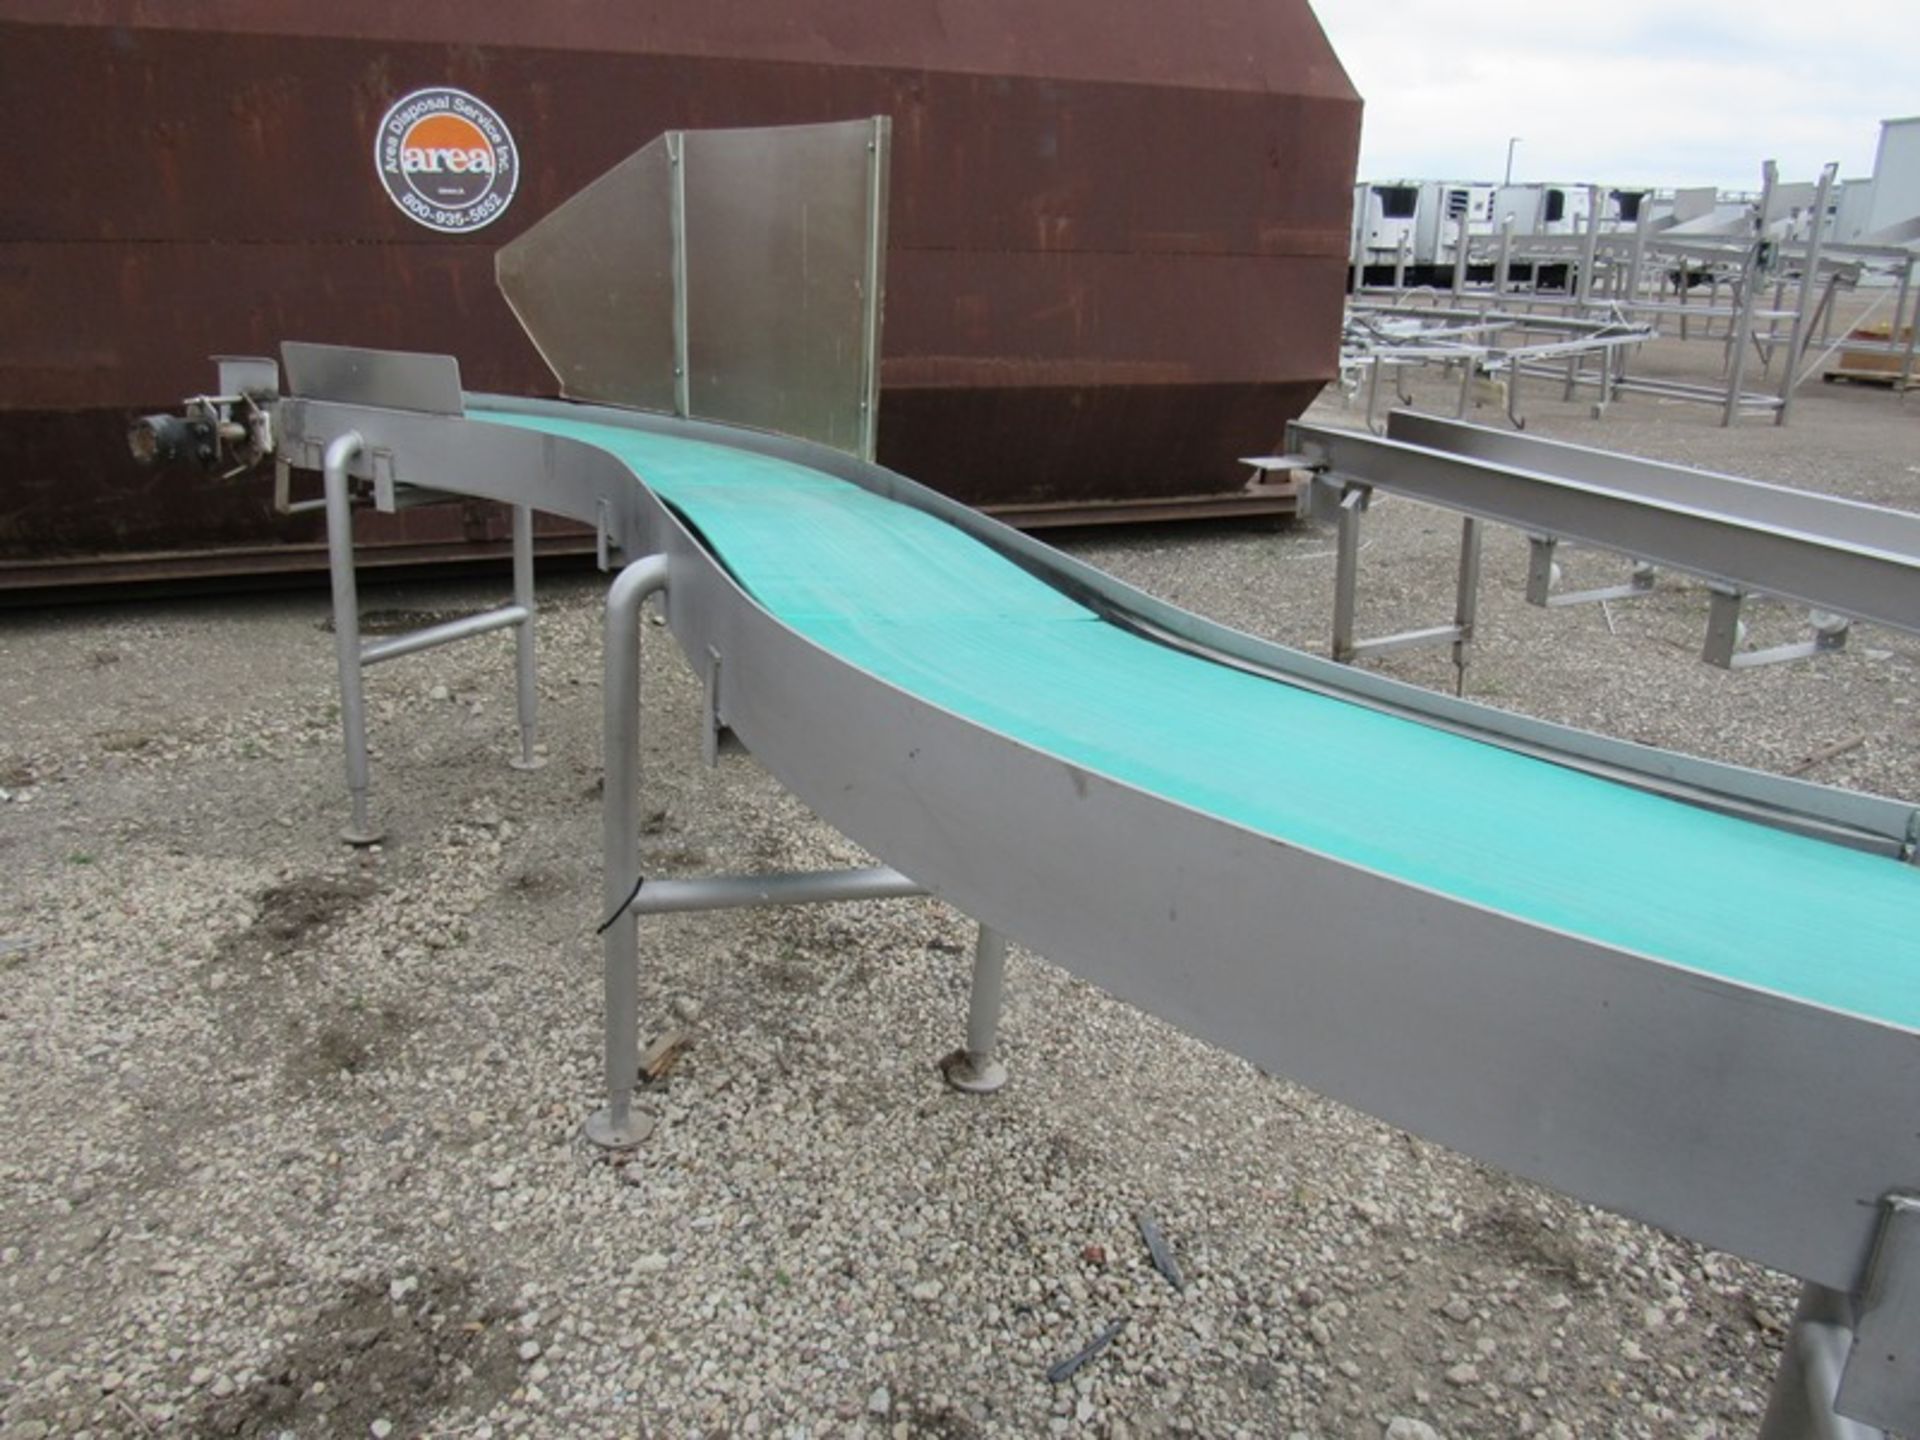 Stainless Steel Conveyor, "S", 12" W X 16' L, hydraulic drive (Loading Fee: $100.00 - Rigger: Norm - Image 3 of 3